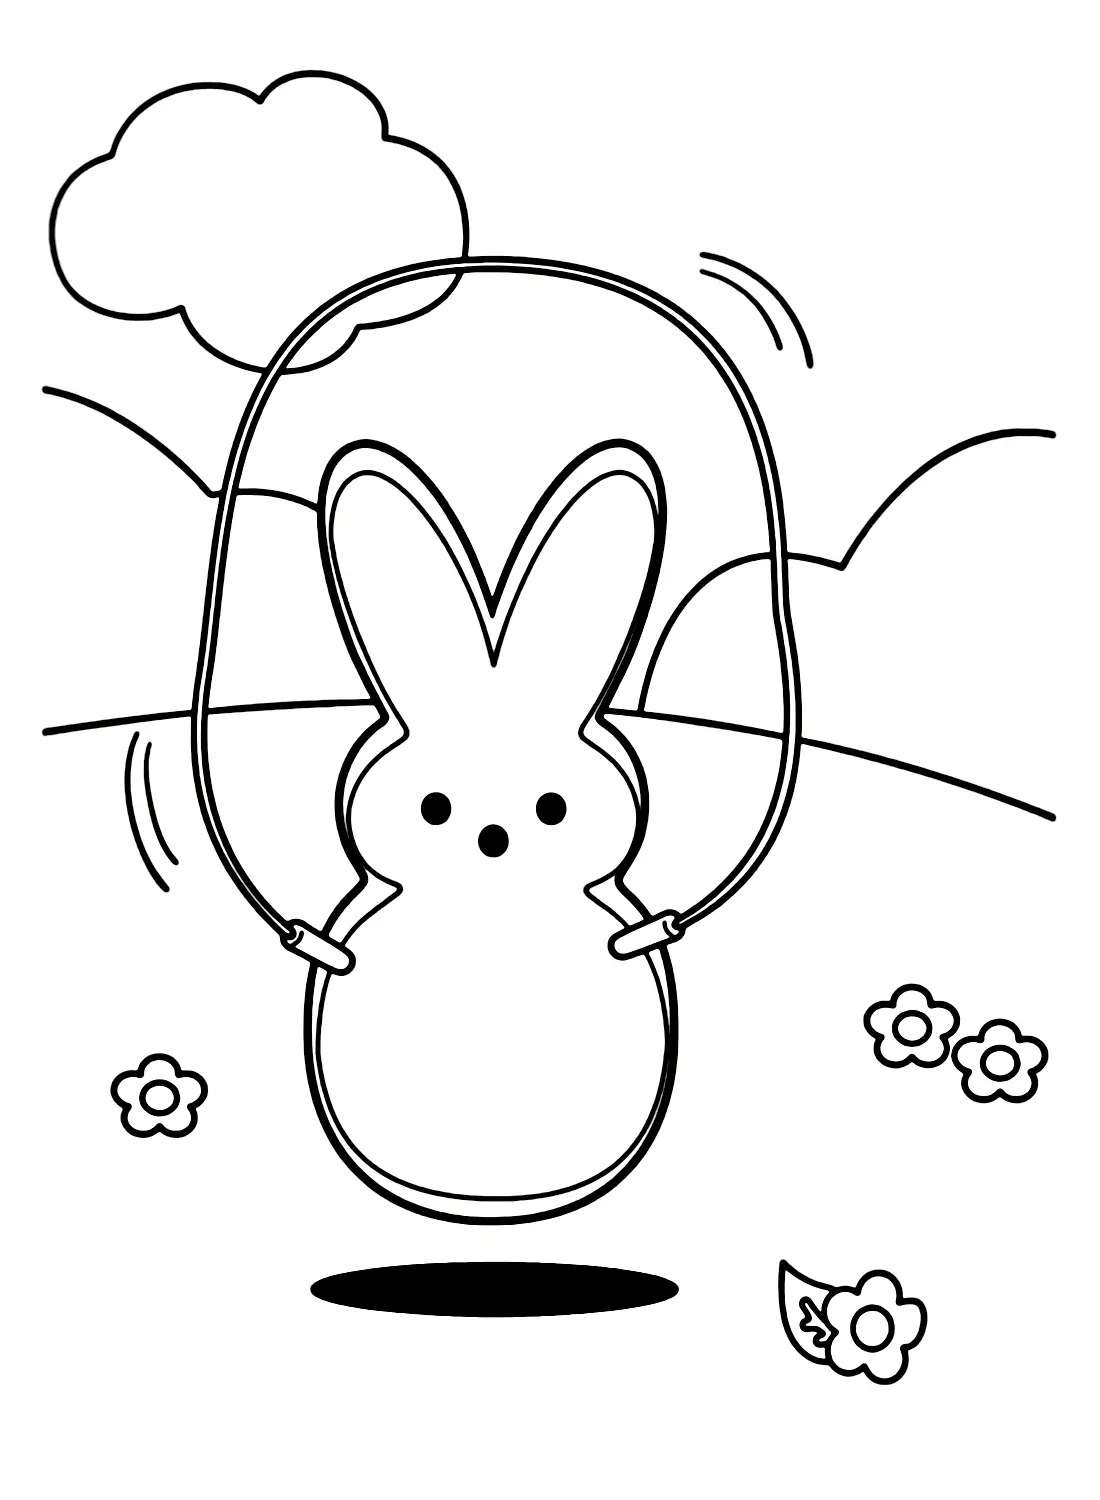 Peeps Coloring Pages